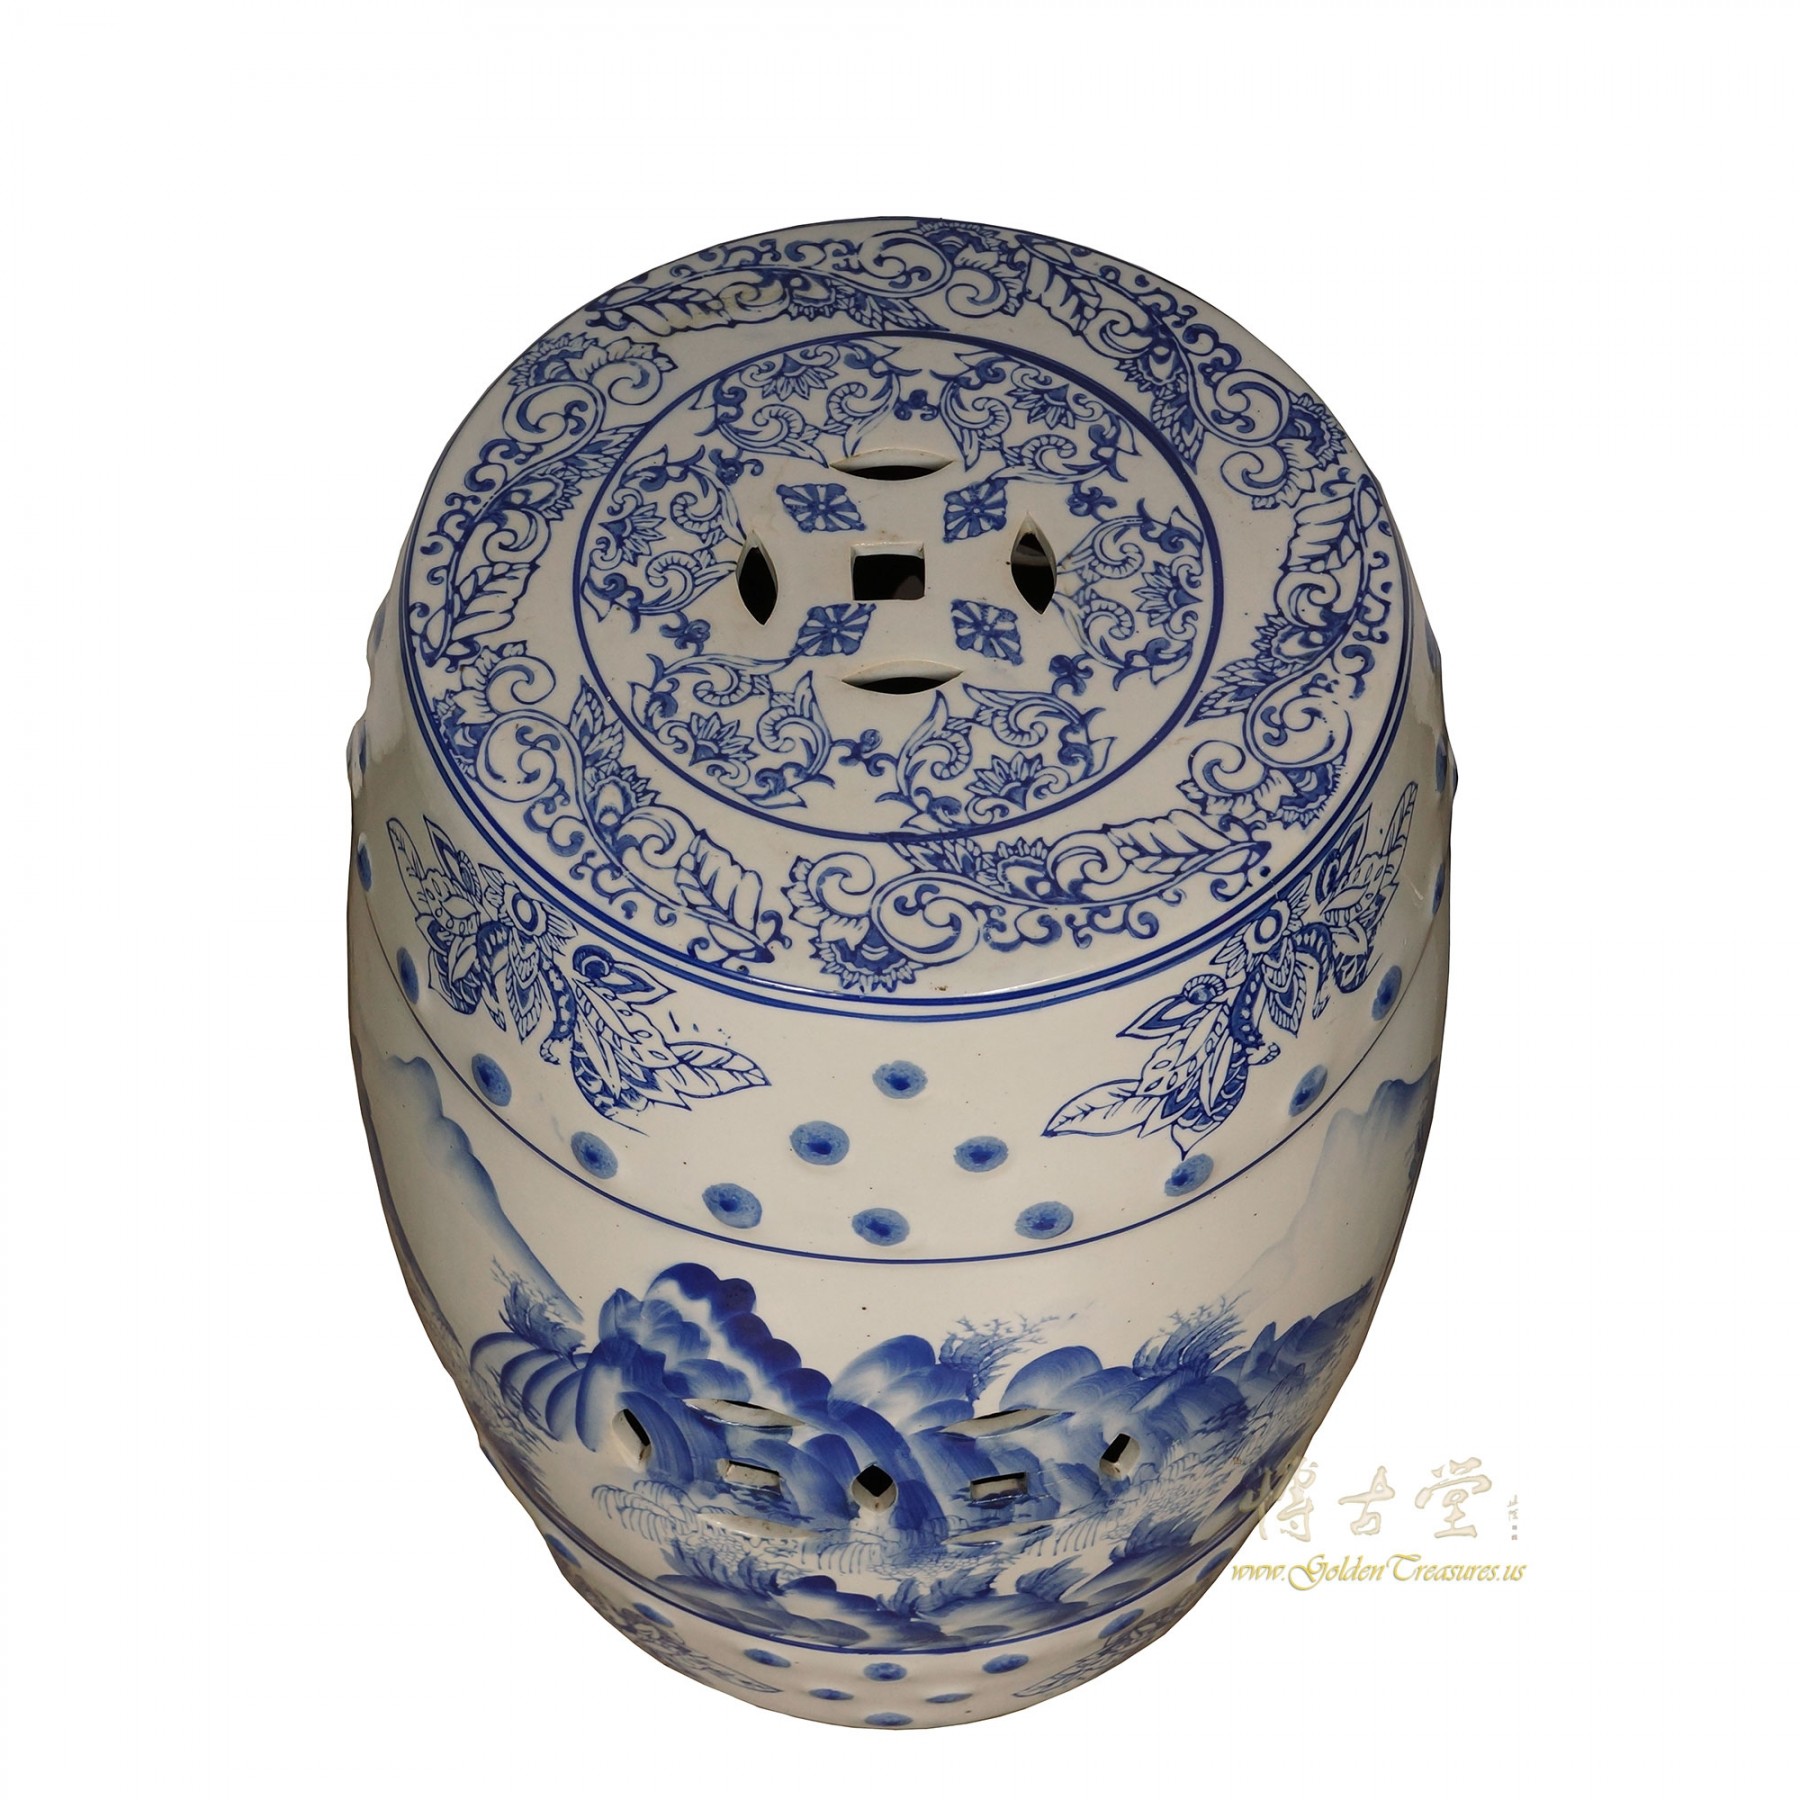 Vintage Chinese Blue and White Ceramic Garden Stool Chinese Antiques